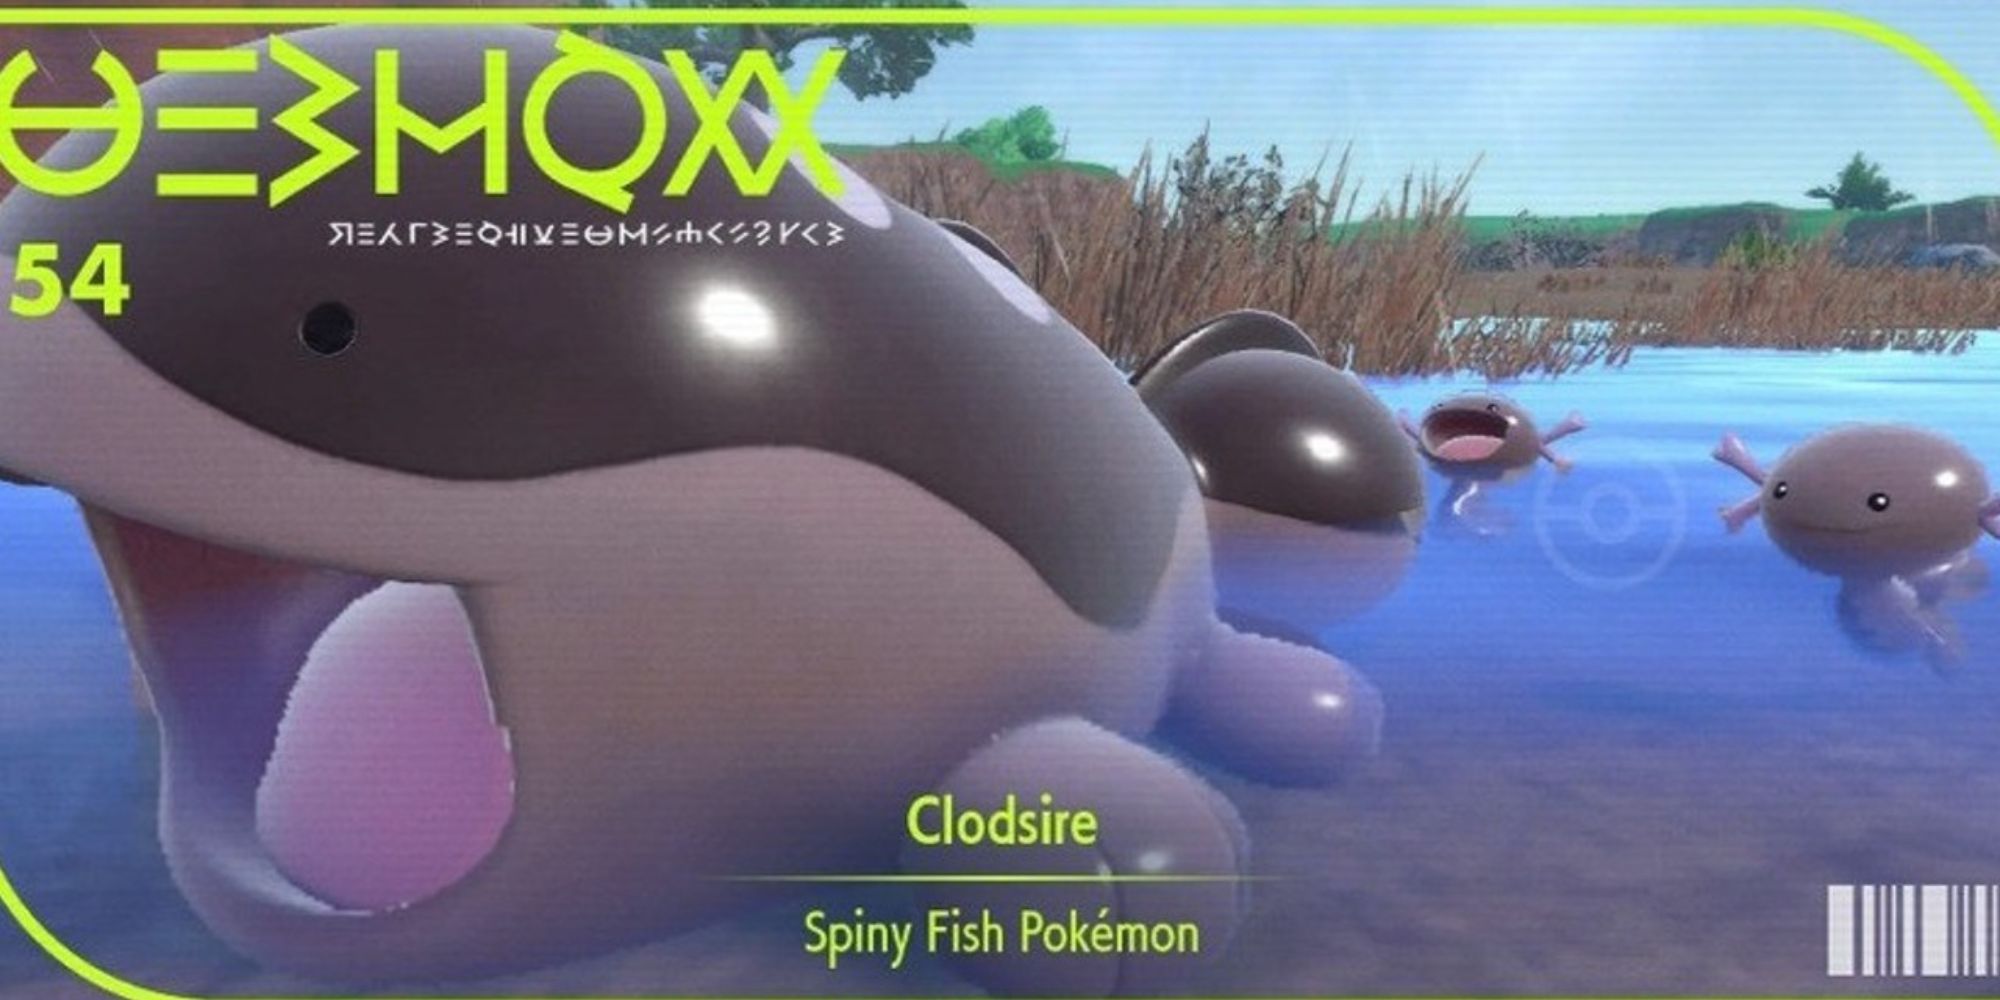 The pokedex cover for Clodsire in Pokemon Scarlet and Violet